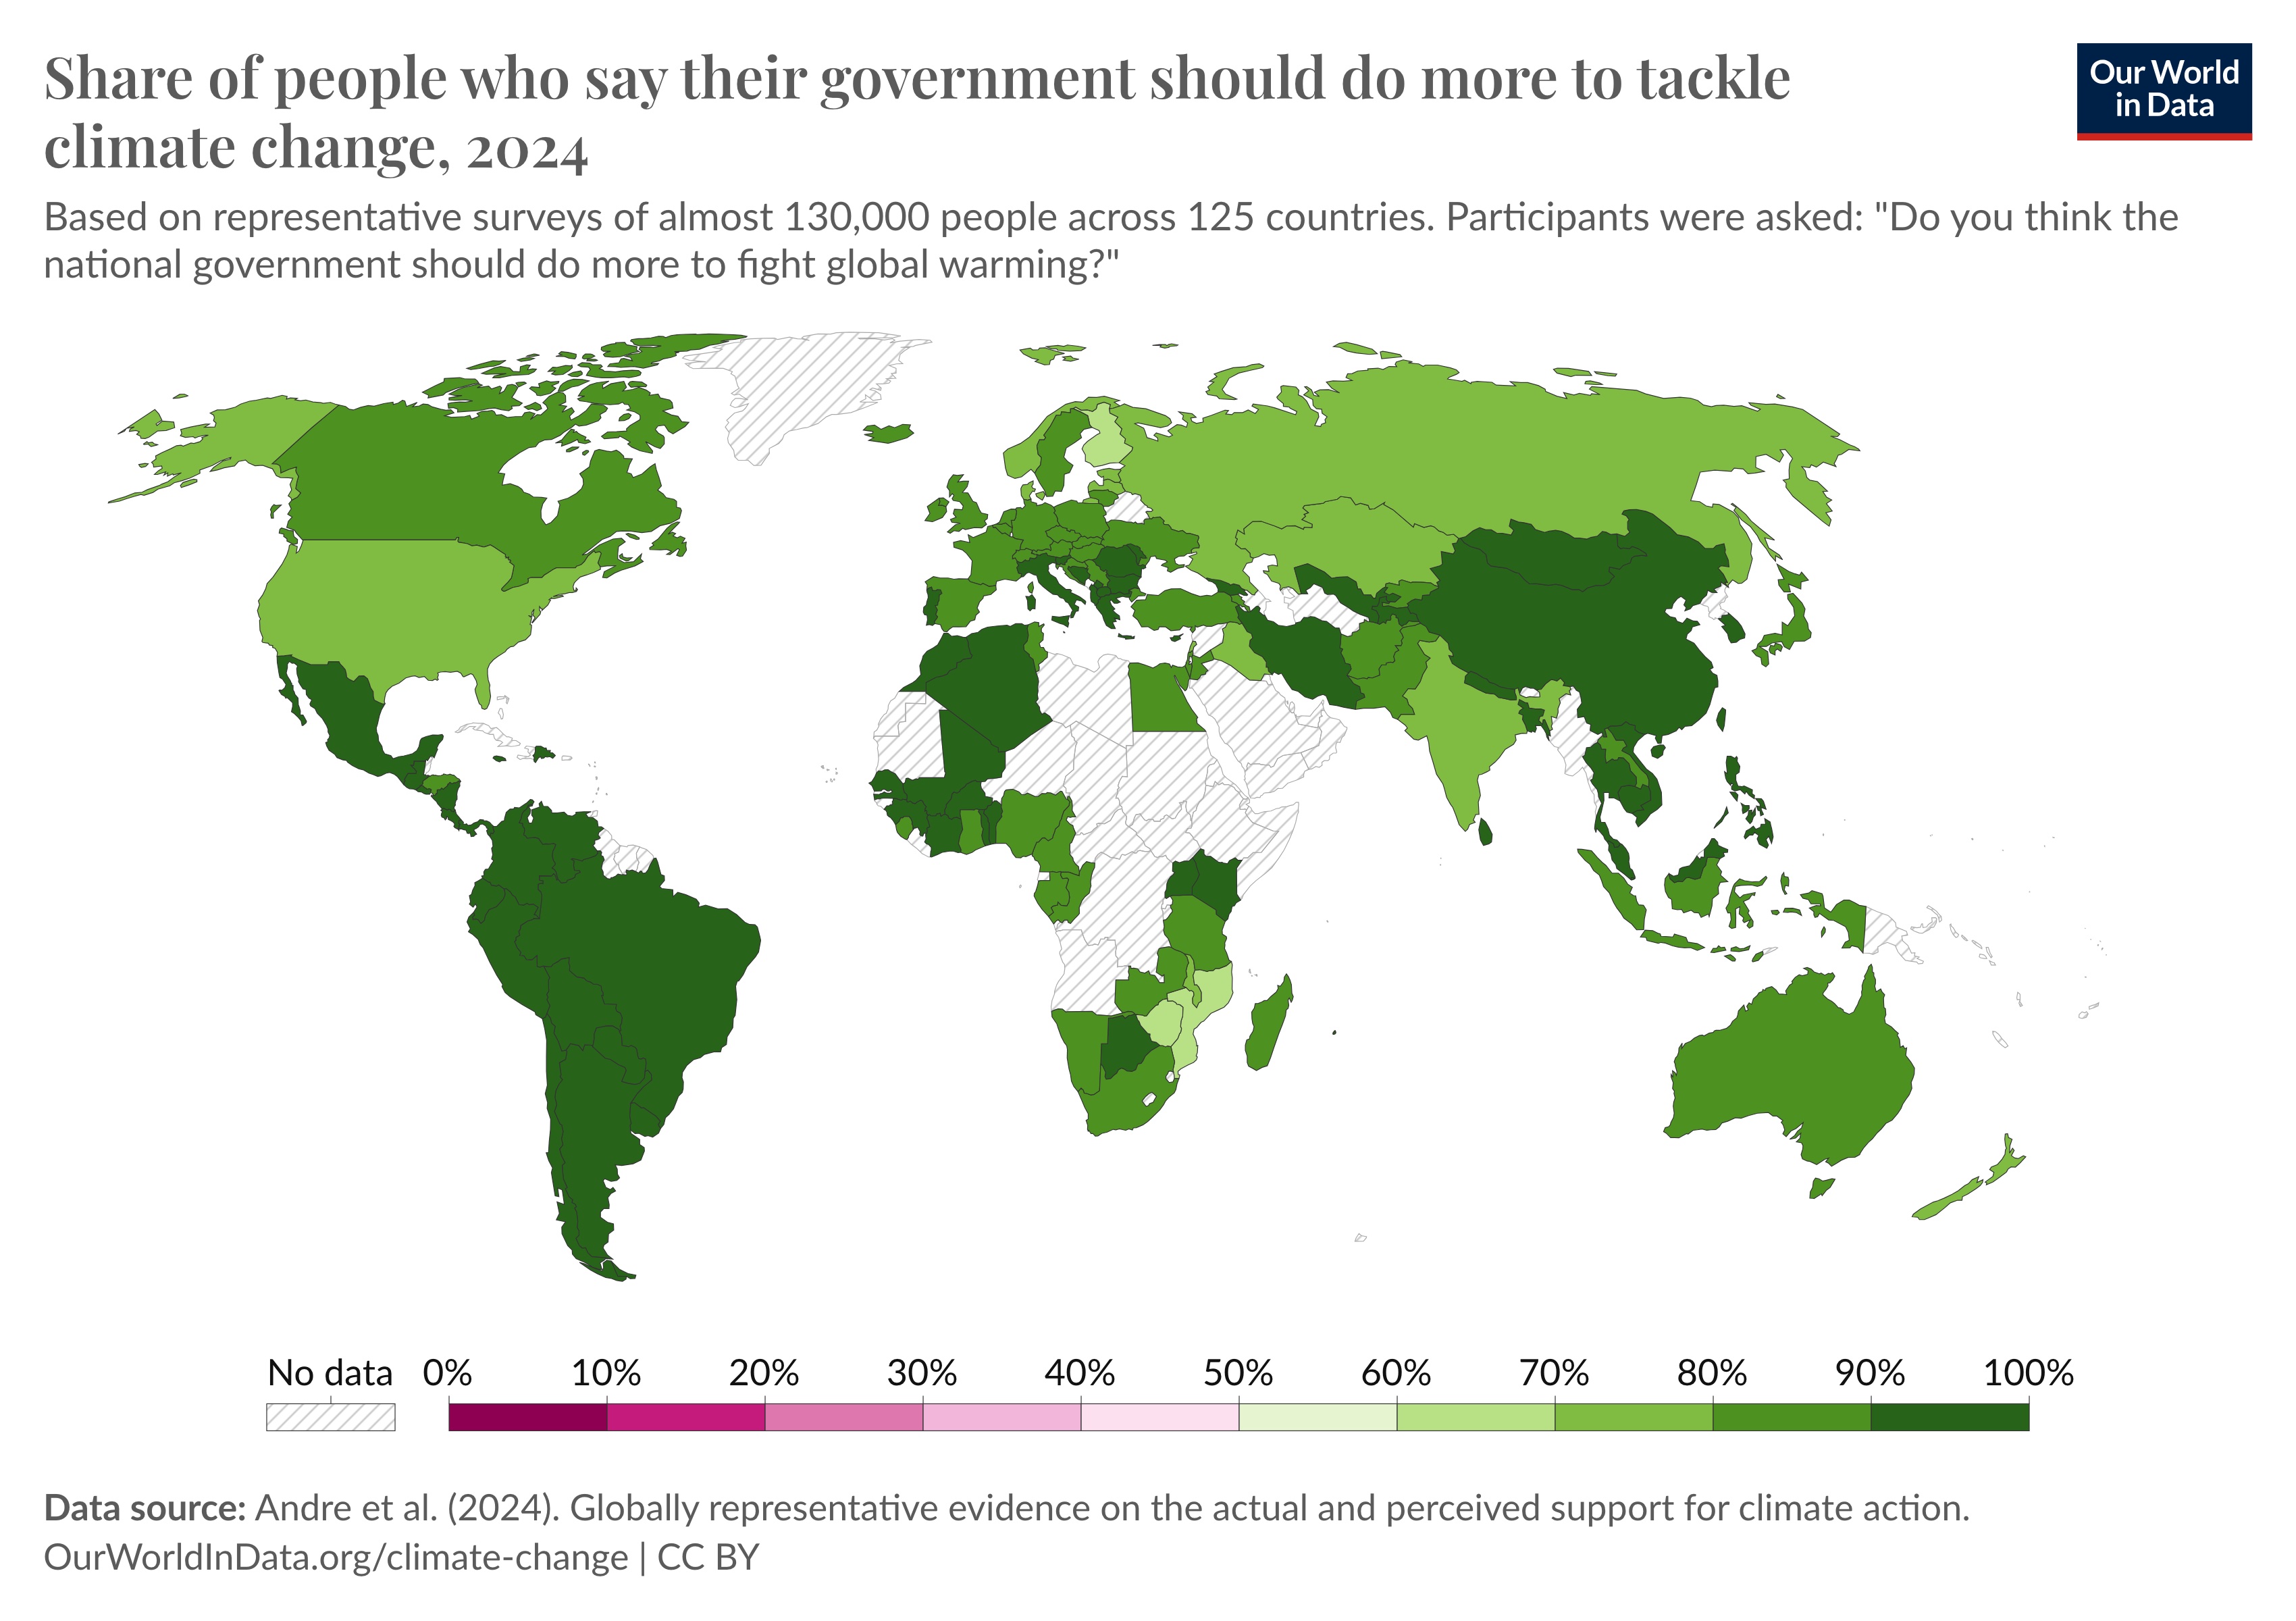 World map showing the percentage of people by country who believe their government should do more to fight global warming in 2024, with varying shades of green indicating different levels of agreement.